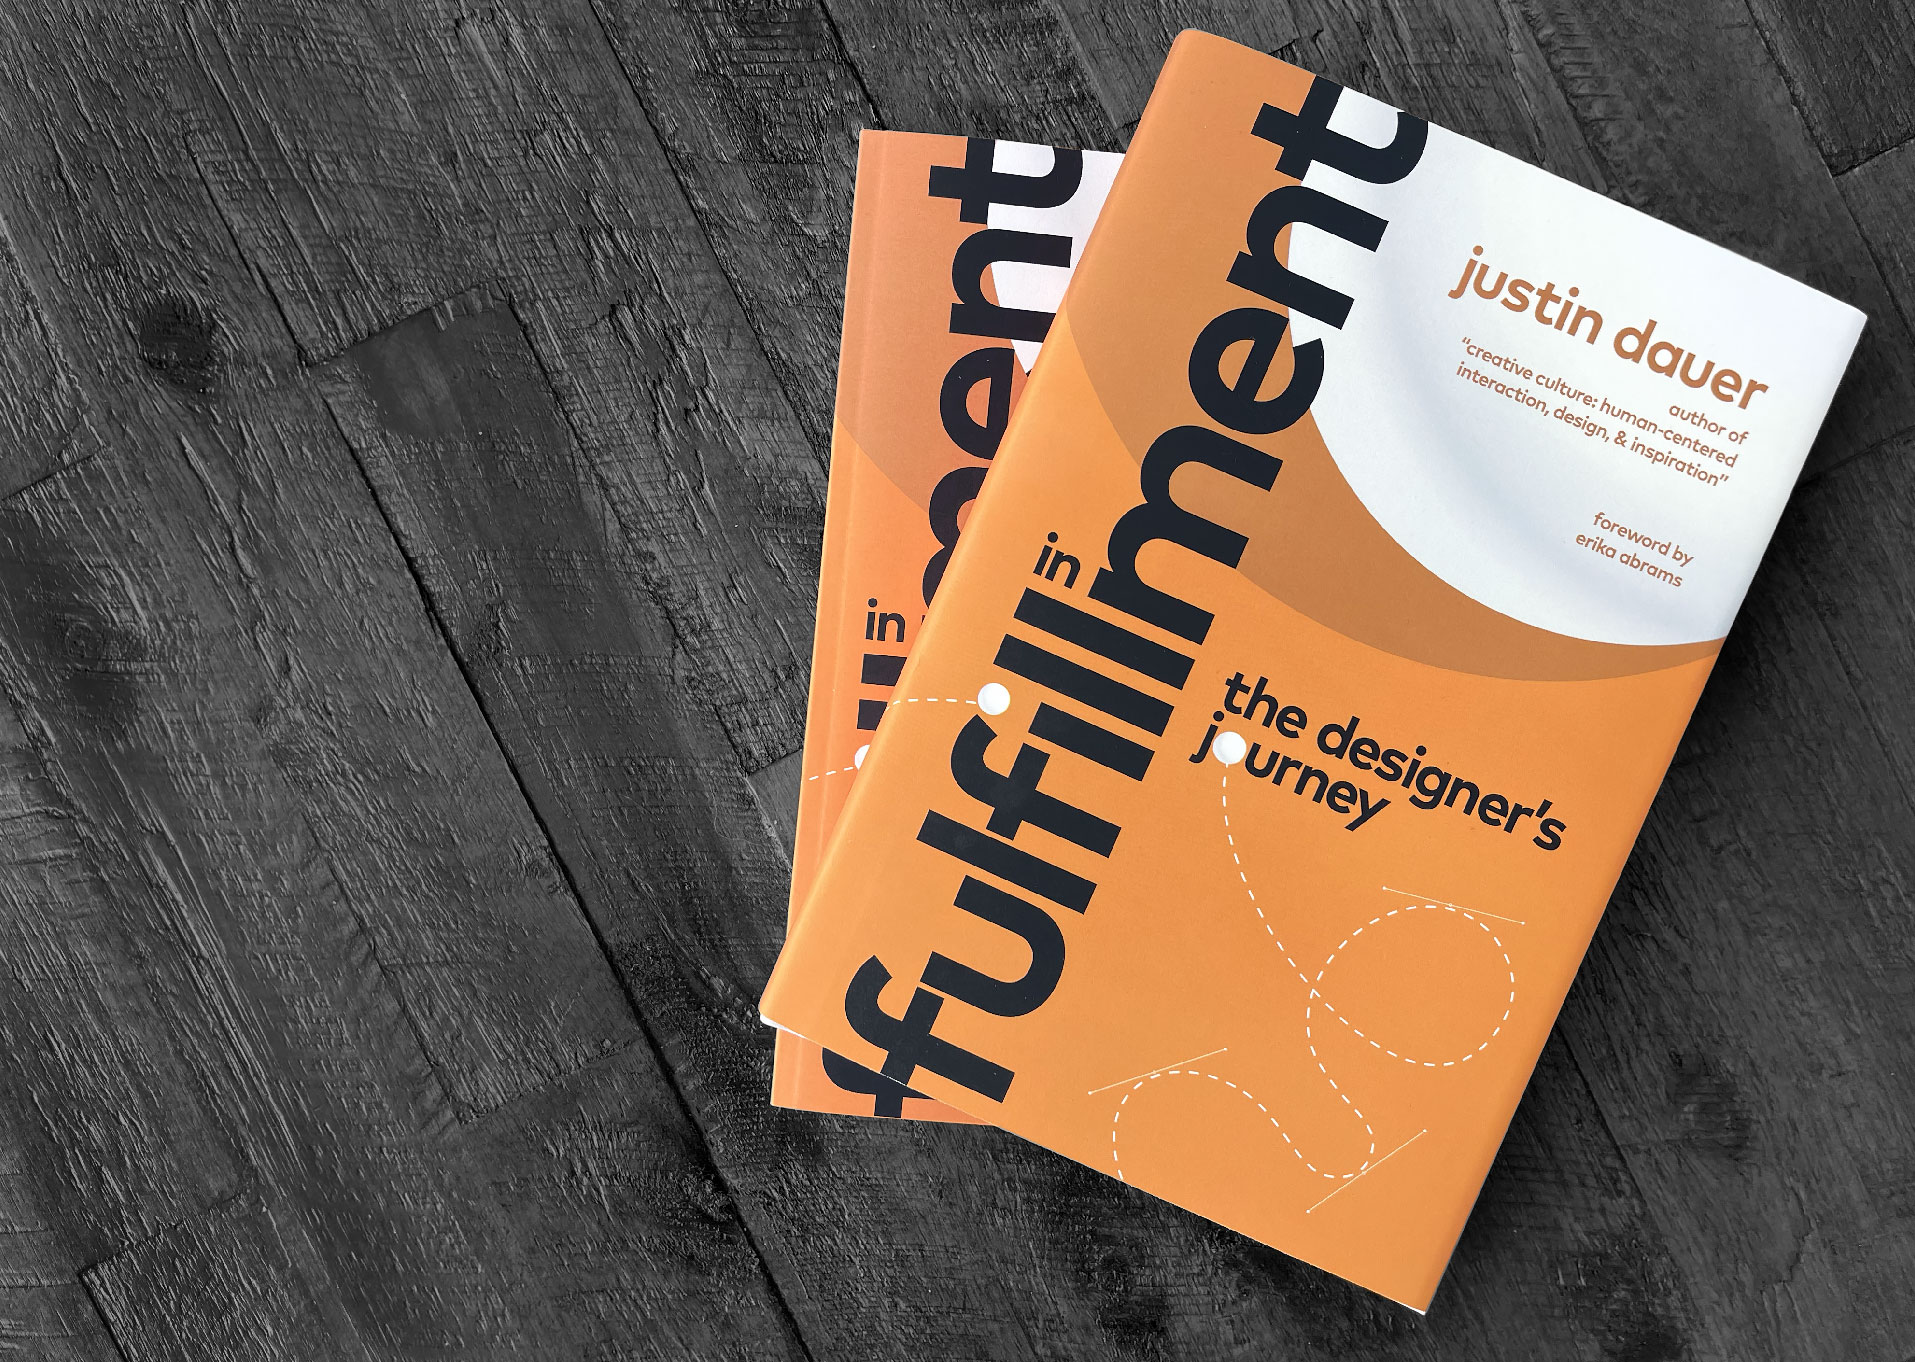 a couple copies of the hardcover book In Fulfillment: The Designer's Journey resting on a wood table